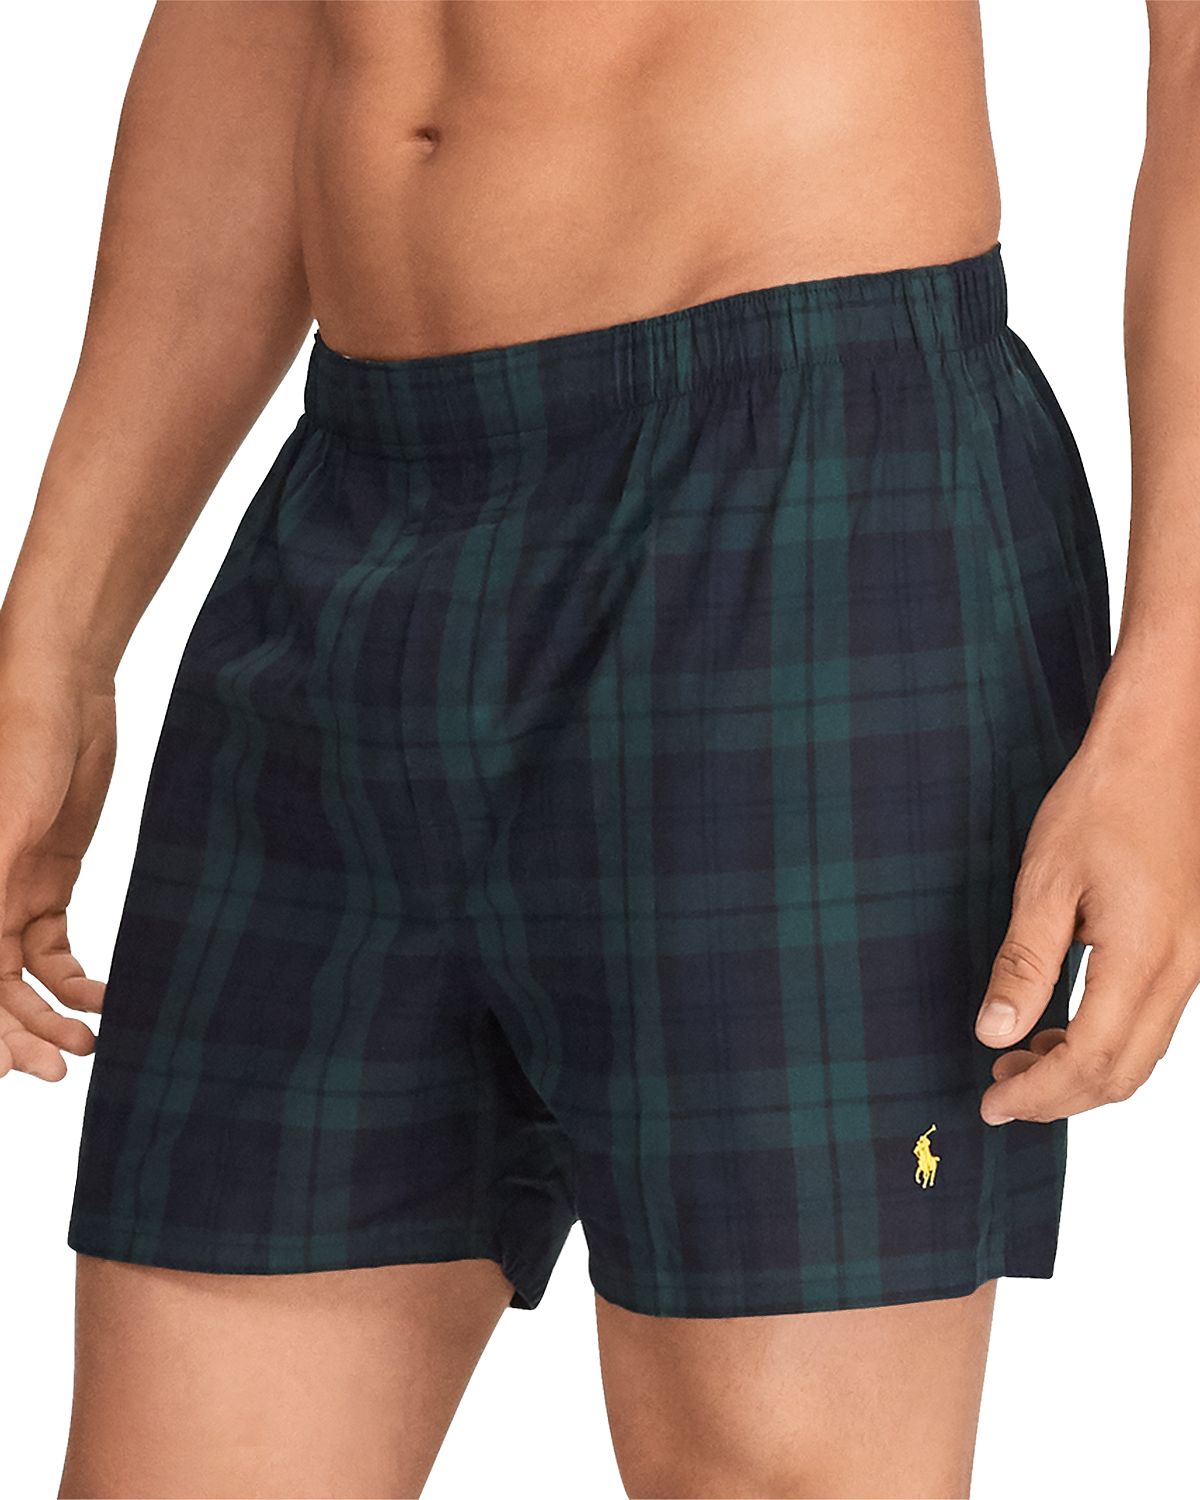 Polo Ralph Lauren Classic Fit Woven Boxers 3 Pack Red/Green/Black